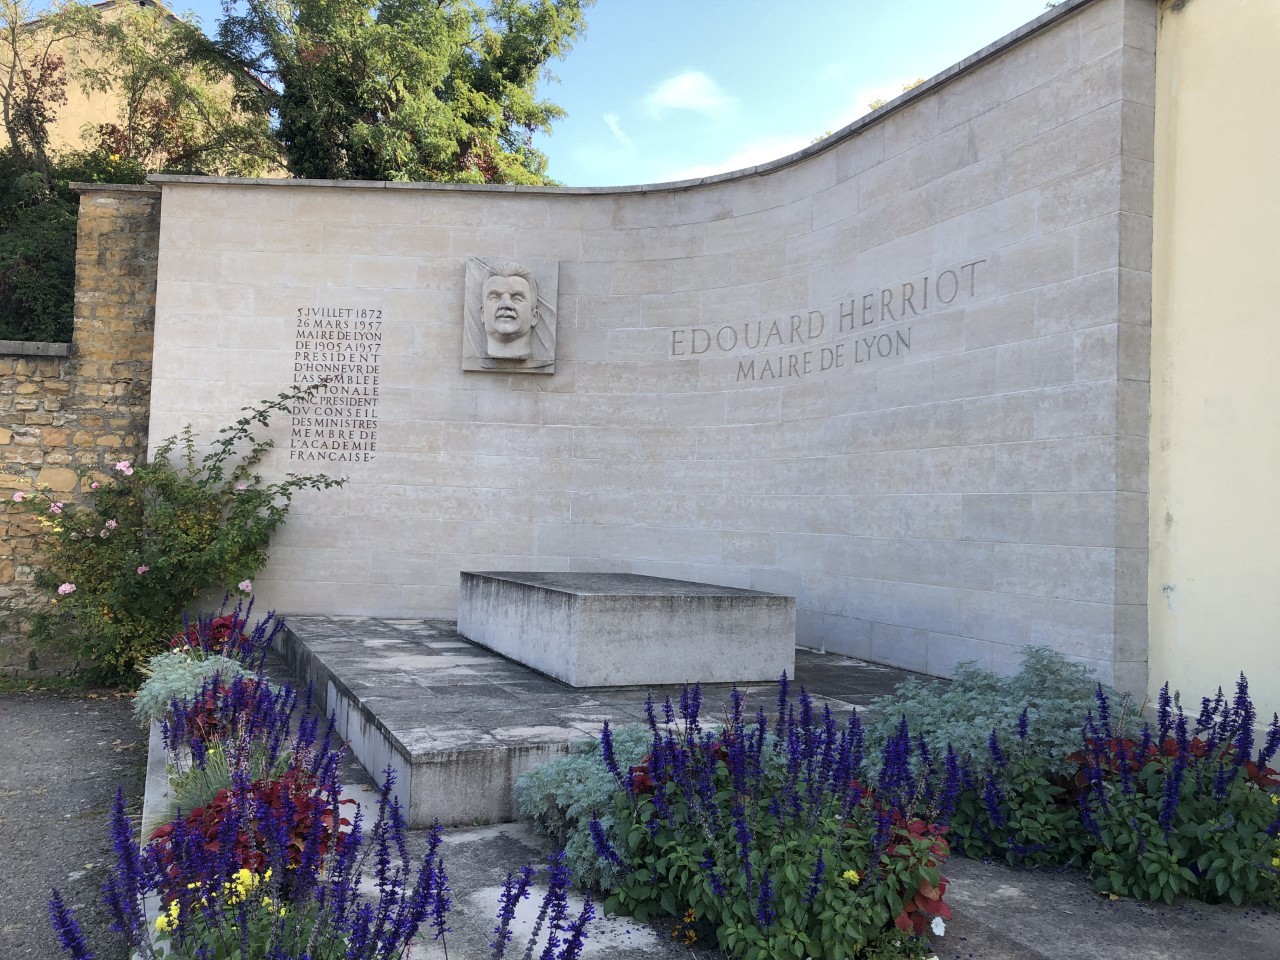 Edouard Herriot's grave is to the right of the entrance to the old cemetery.